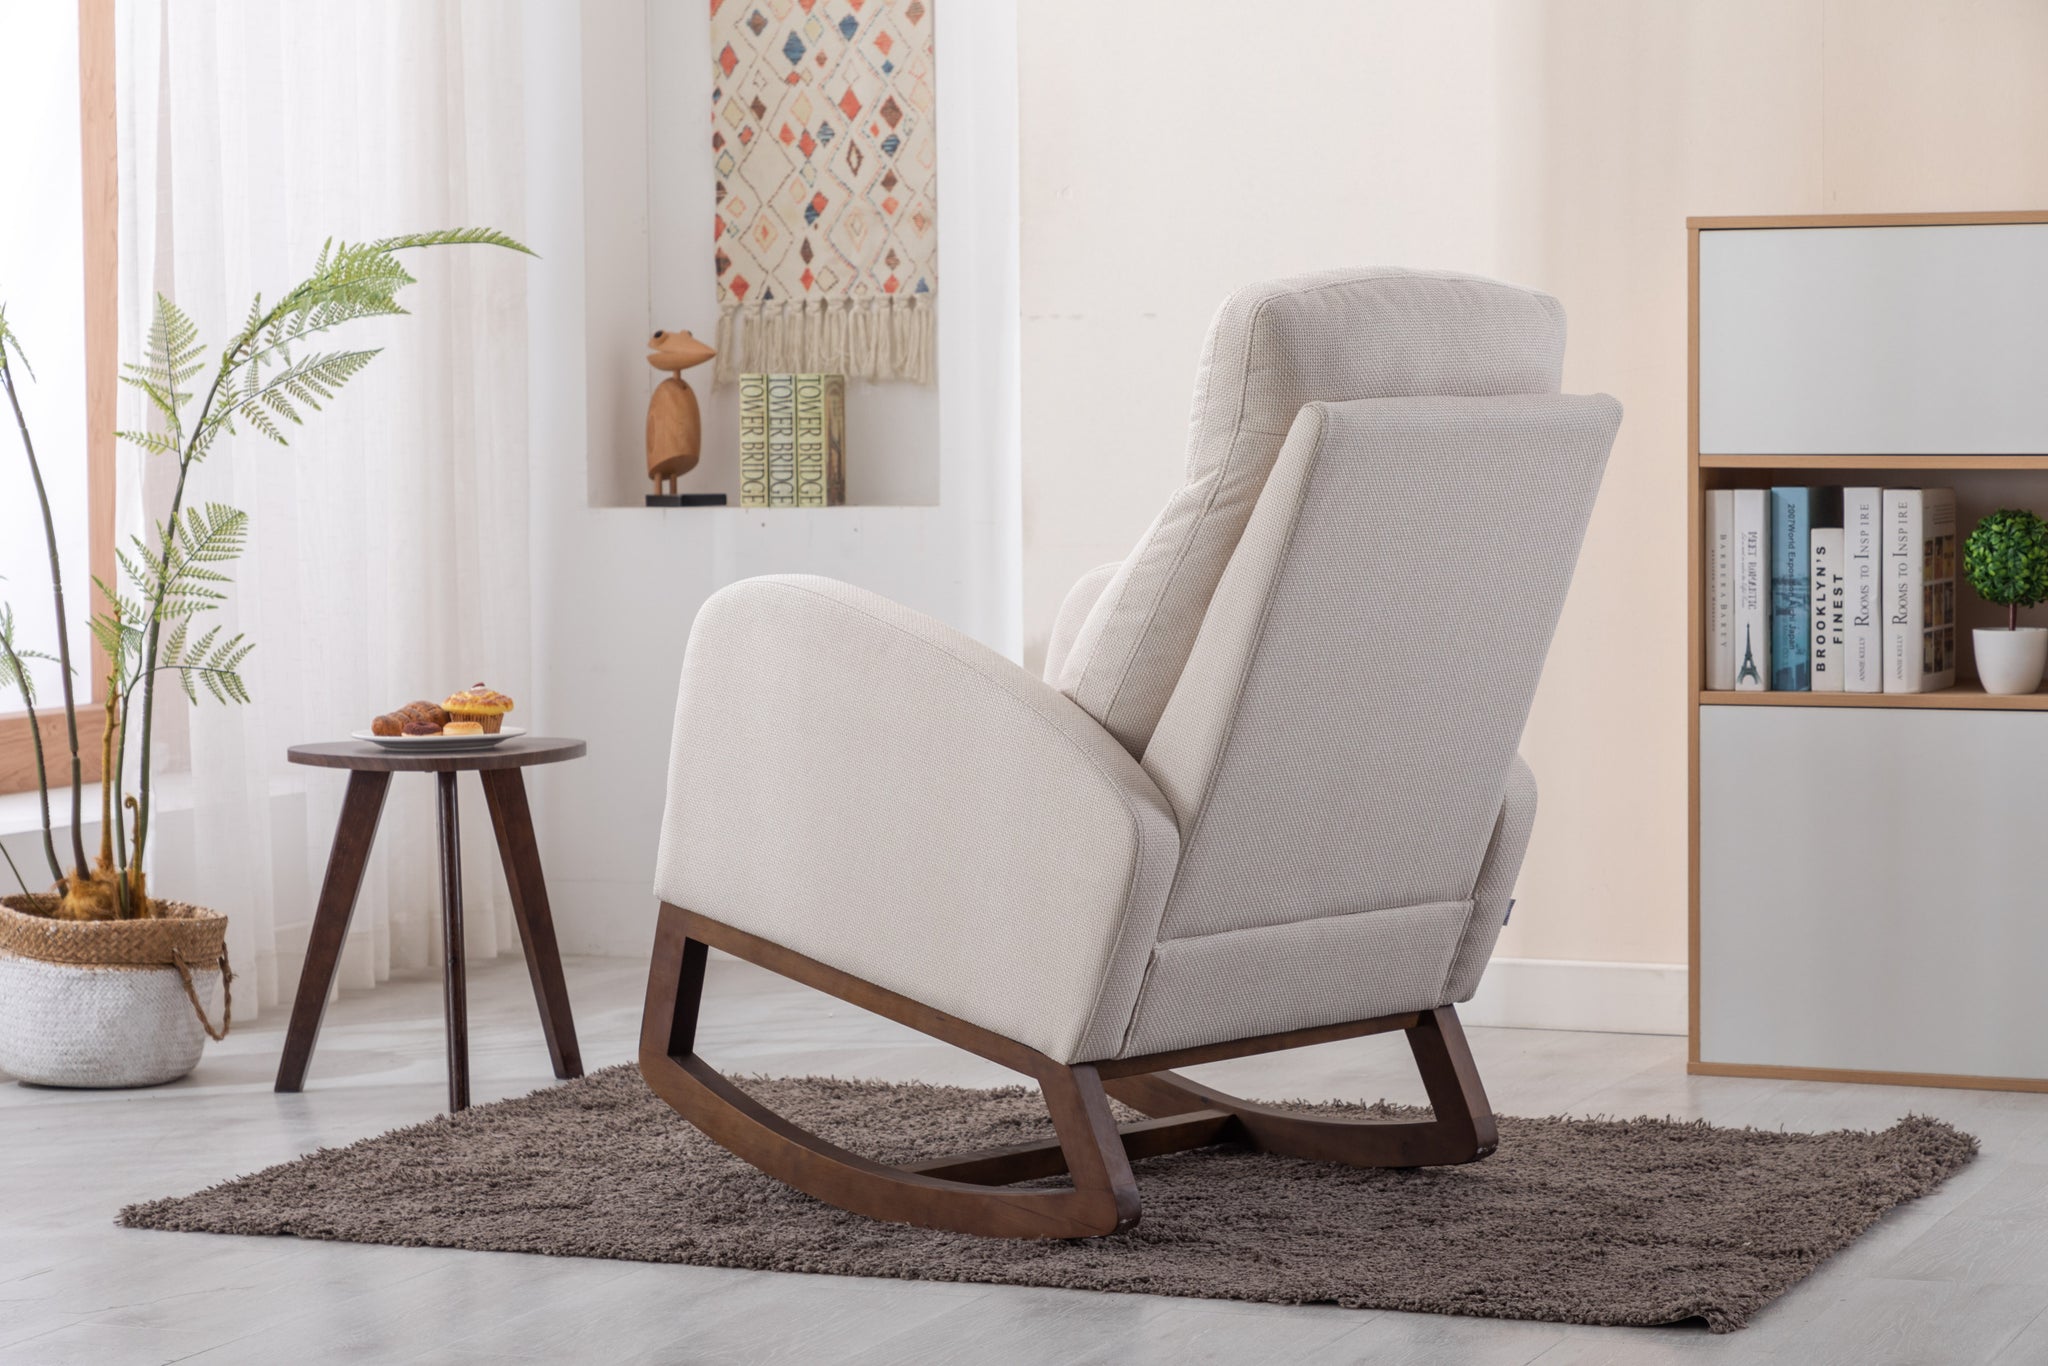 COOLMORE living room Comfortable rocking chair living beige-solid wood